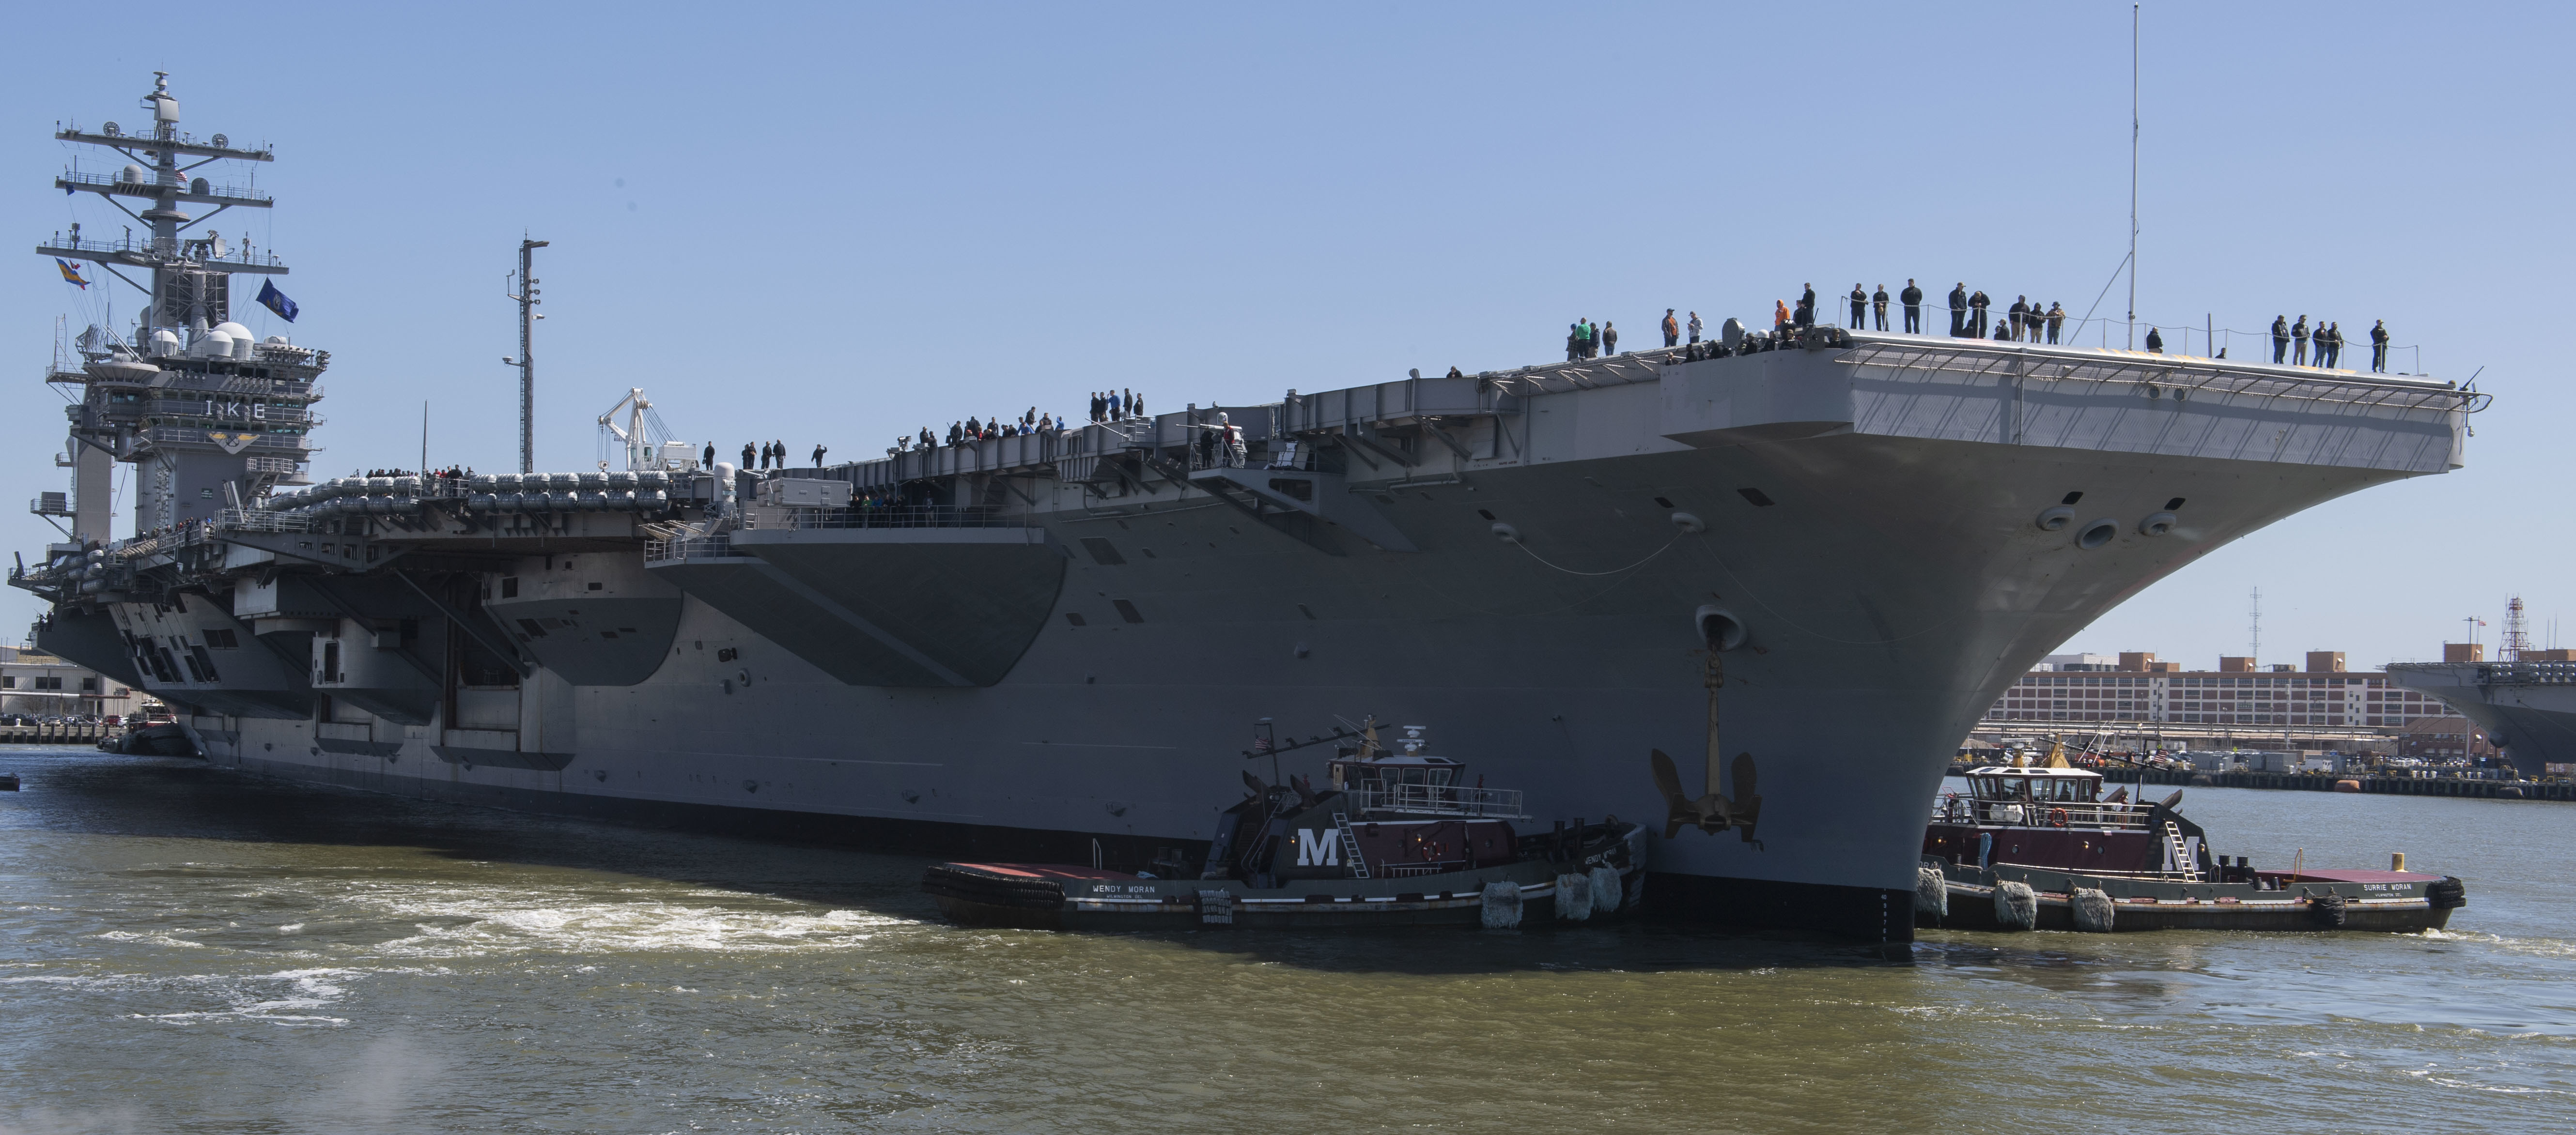 Carrier Eisenhower Back to Sea After Planned 6-Month Repair Period ...